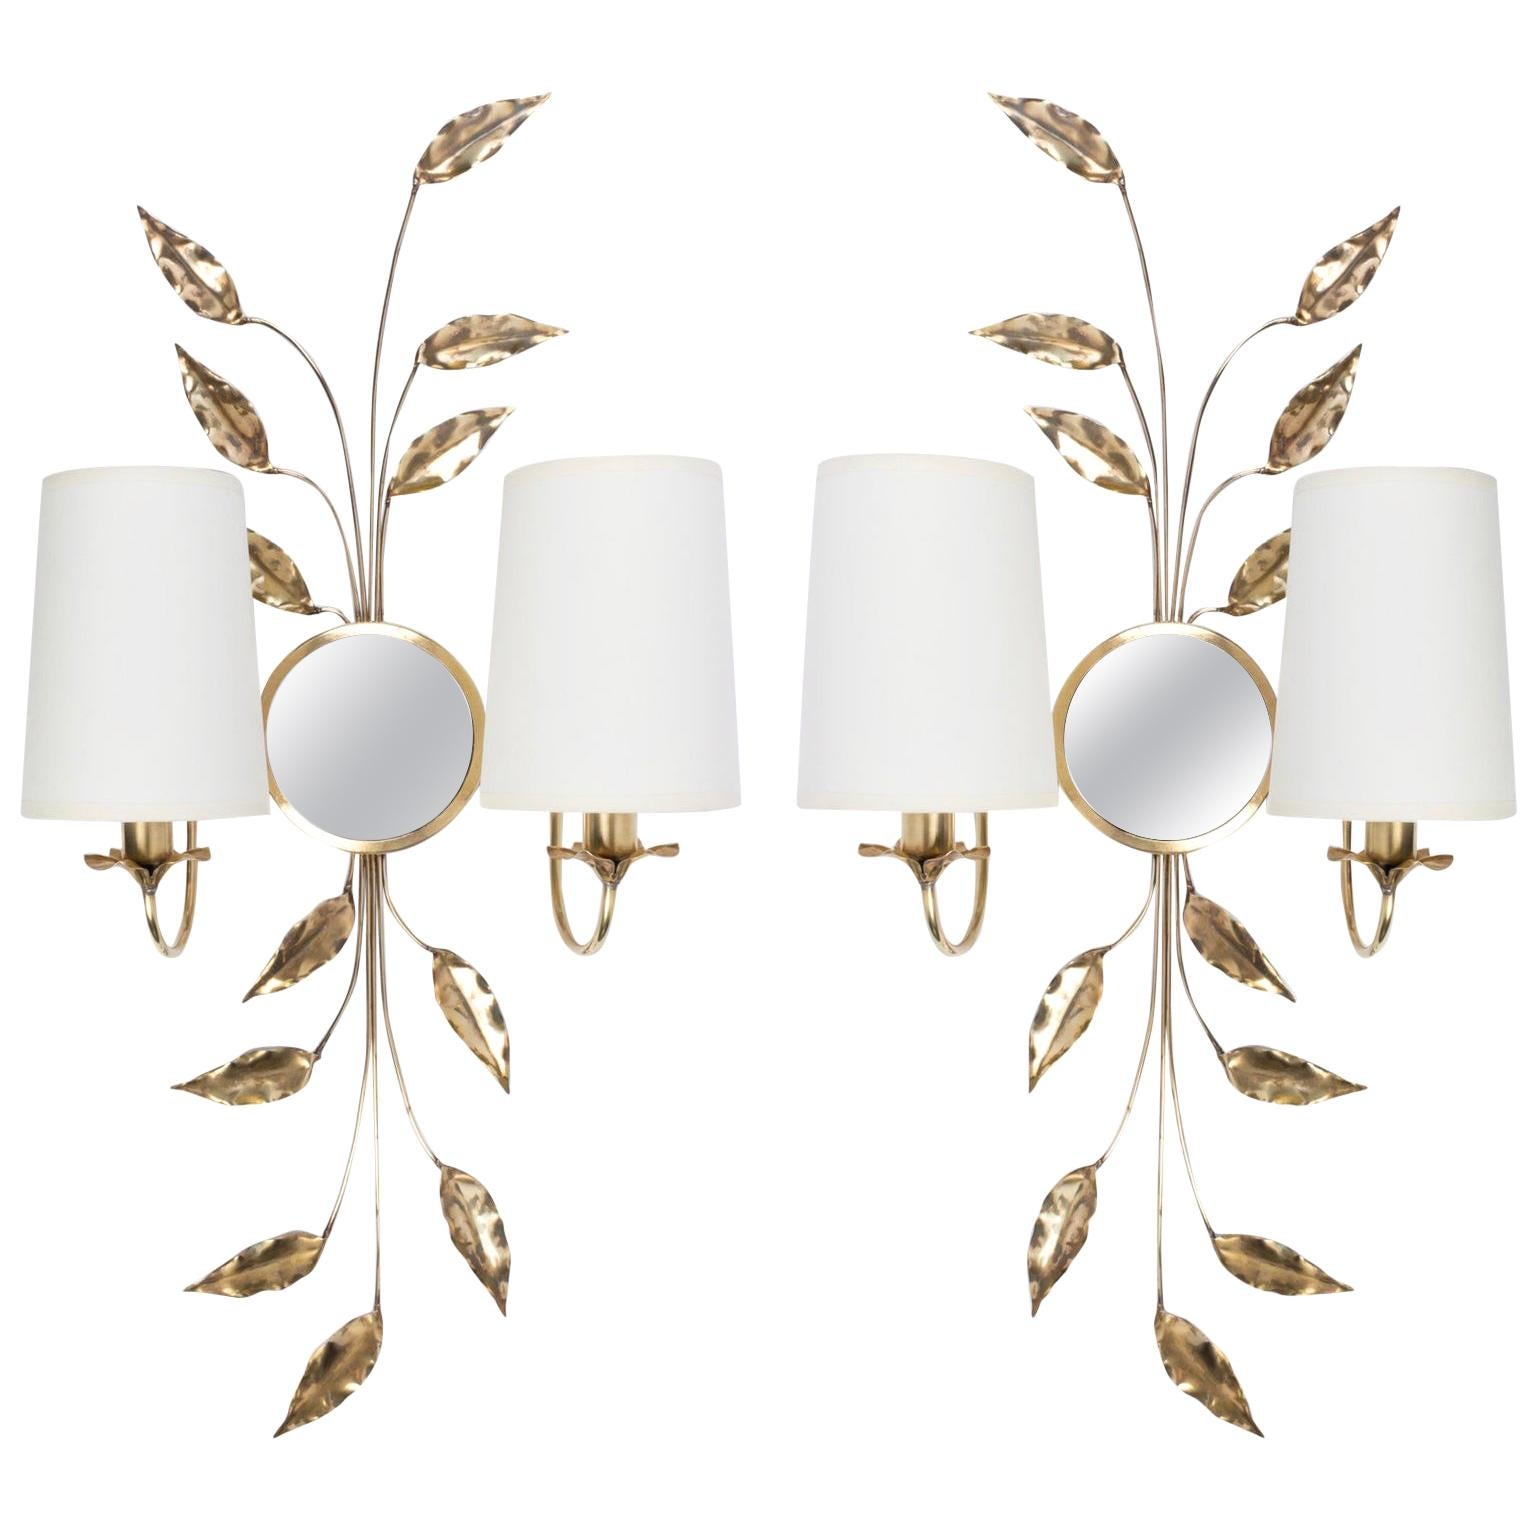 1960s Pair of Maison Honore Brass Foliage and Mirror Sconces